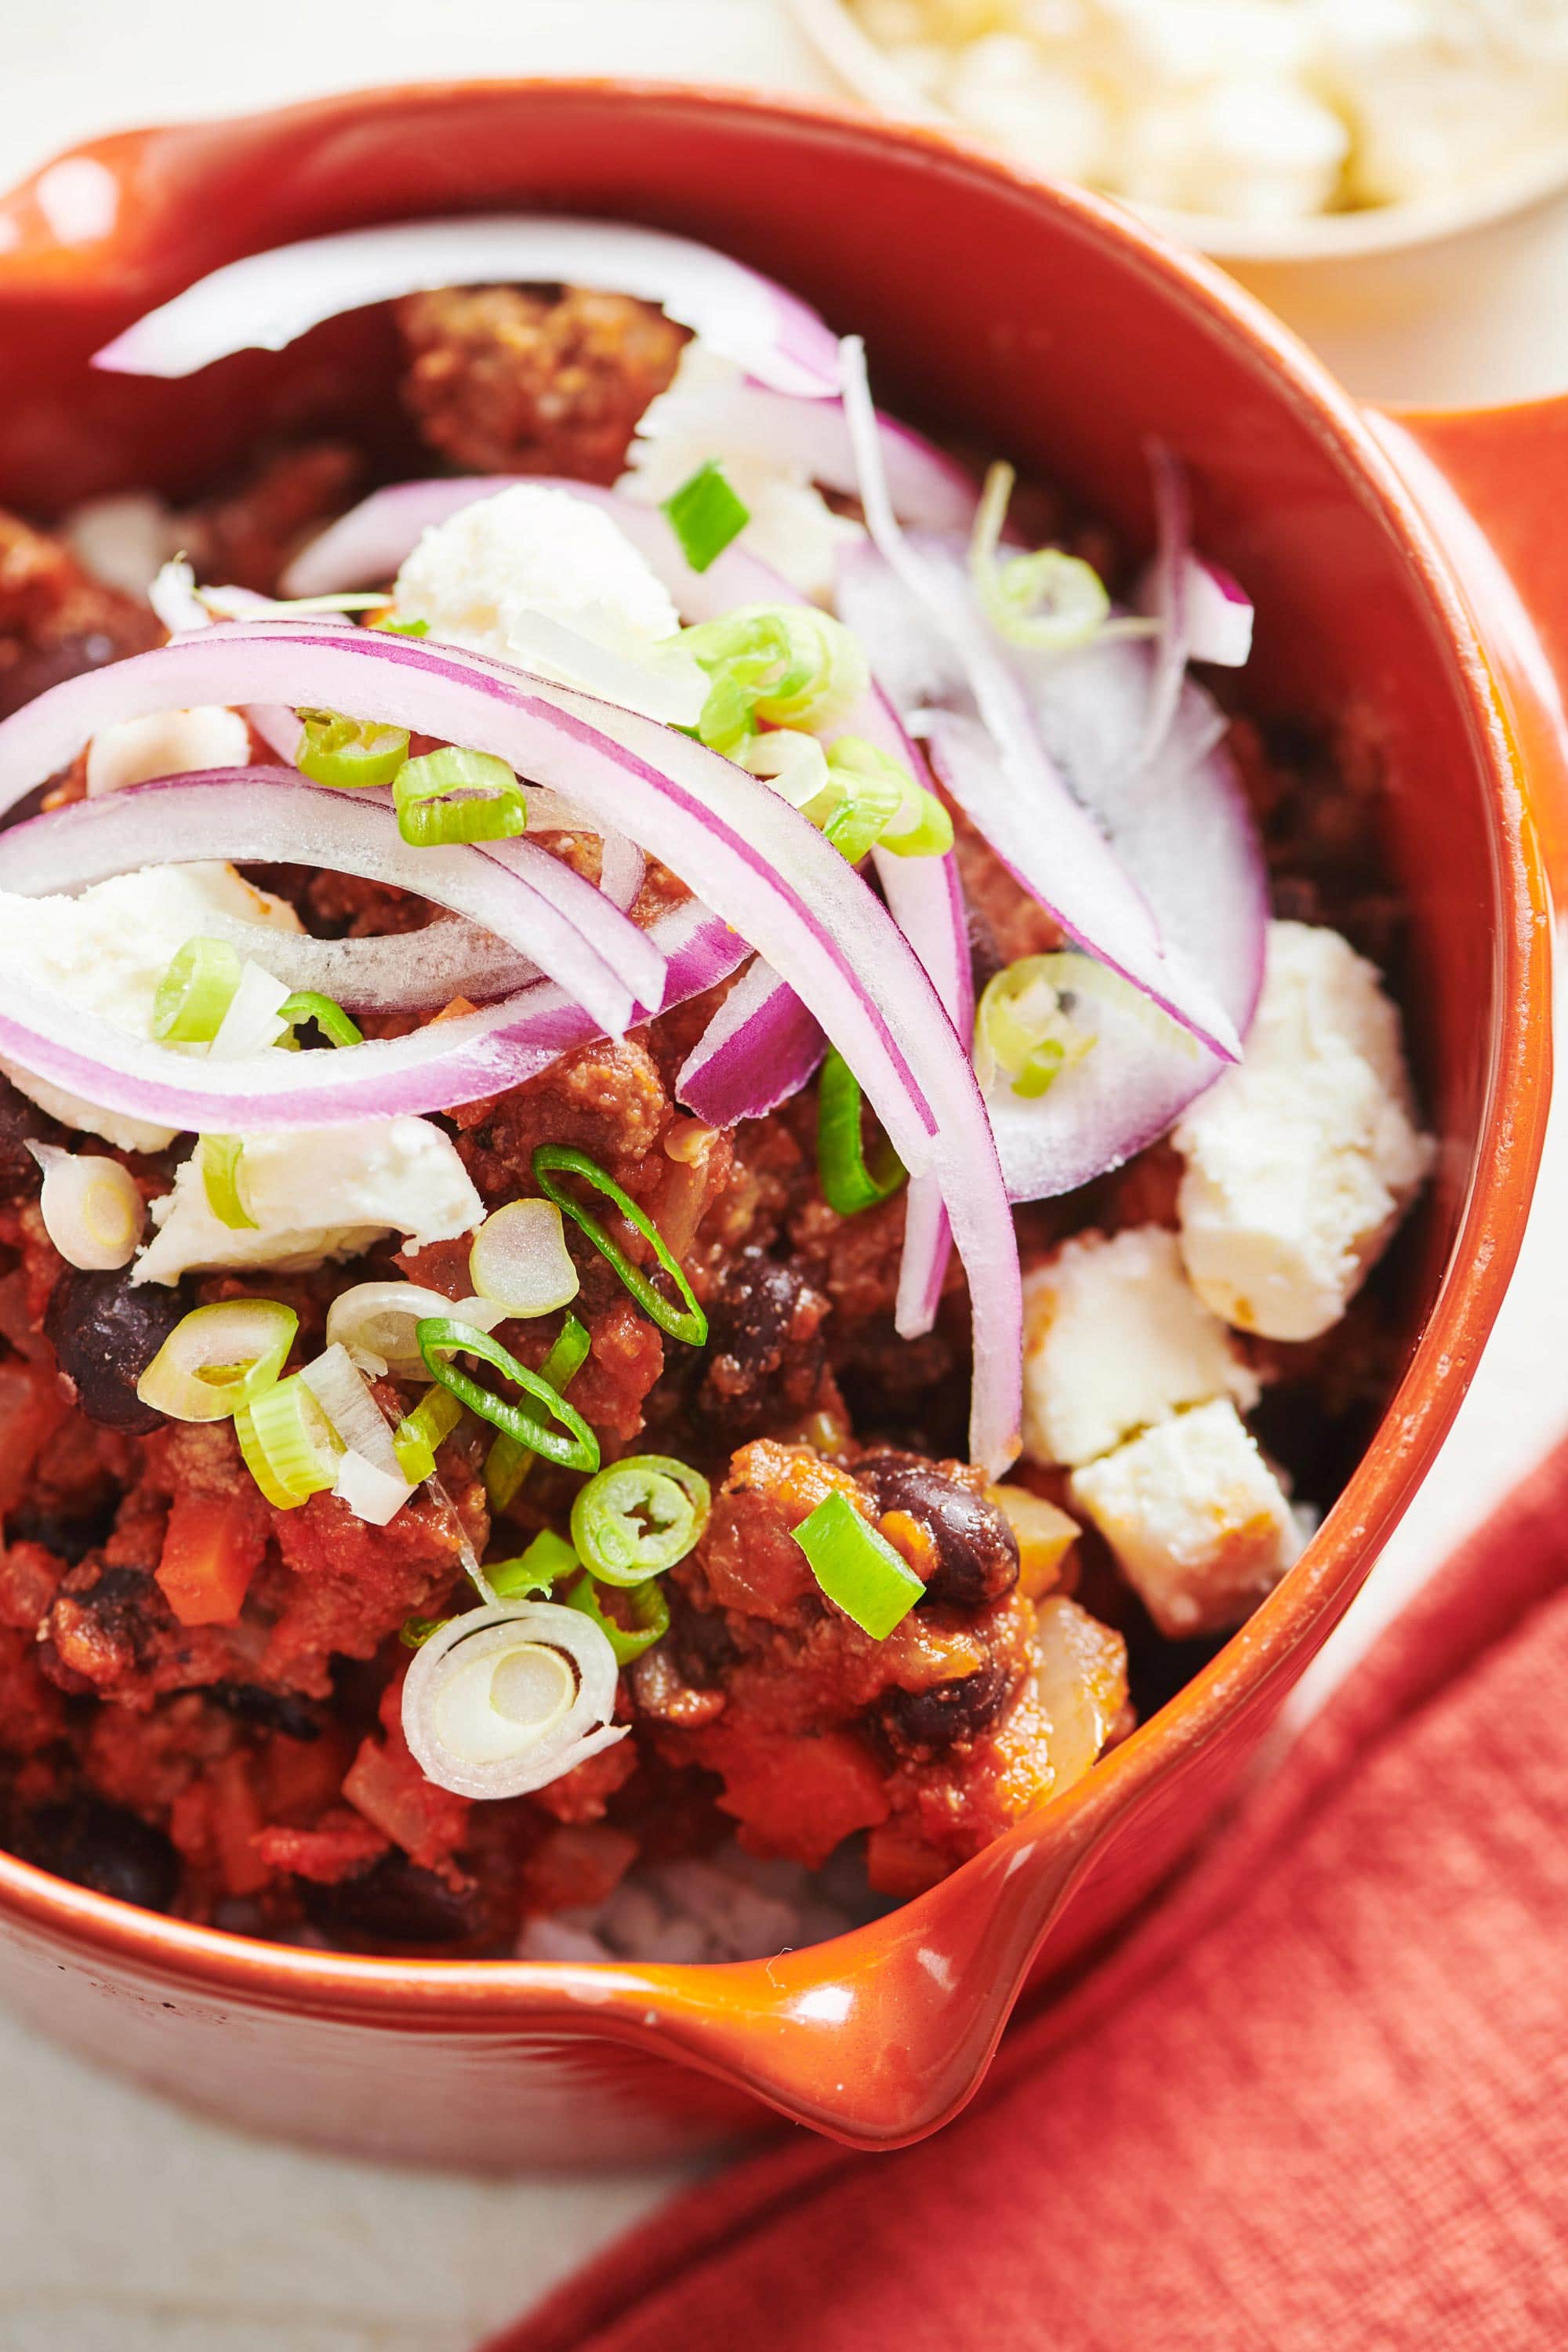 Bowl of Beef, Black Bean and Jalapeno Chili.